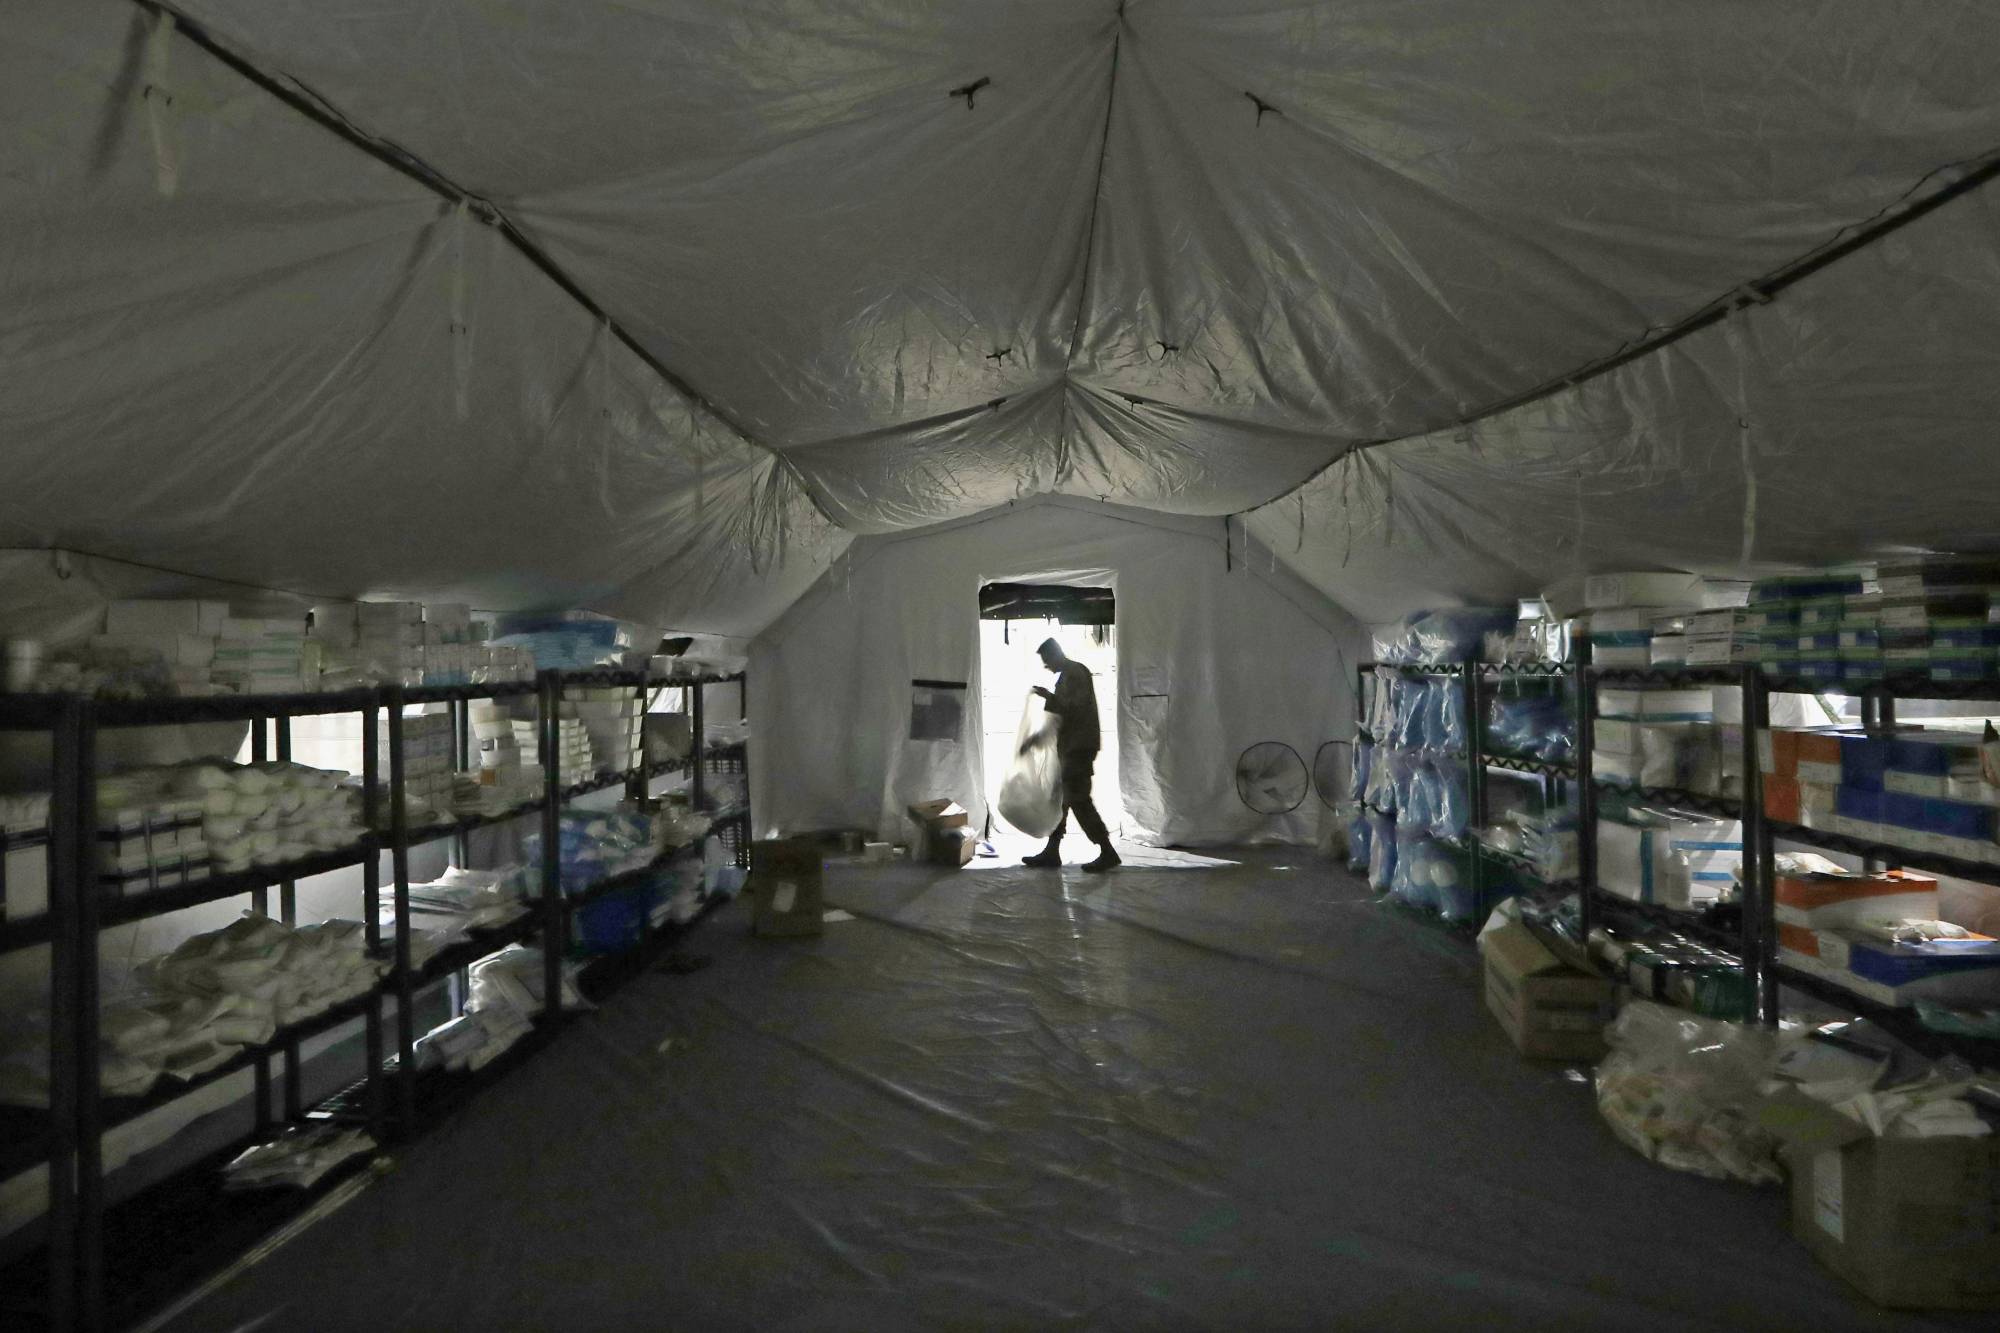 A U.S. Army soldier walks inside a mobile surgical unit being set up by soldiers from Fort Carson, Col., and Joint Base Lewis-McChord (JBLM) as part of a field hospital inside CenturyLink Field Event Center, Tuesday, March 31, 2020, in Seattle. Soldiers from the 627th Army Hospital at Fort Carson, will join soldiers from JBLM to staff the 250-bed hospital to be used for non-COVID-19 cases, allowing local hospitals additional space for patients affected by the coronavirus outbreak. Officials said that the field hospital is expected to be ready to receive patients next week. (AP Photo/Elaine Thompson)